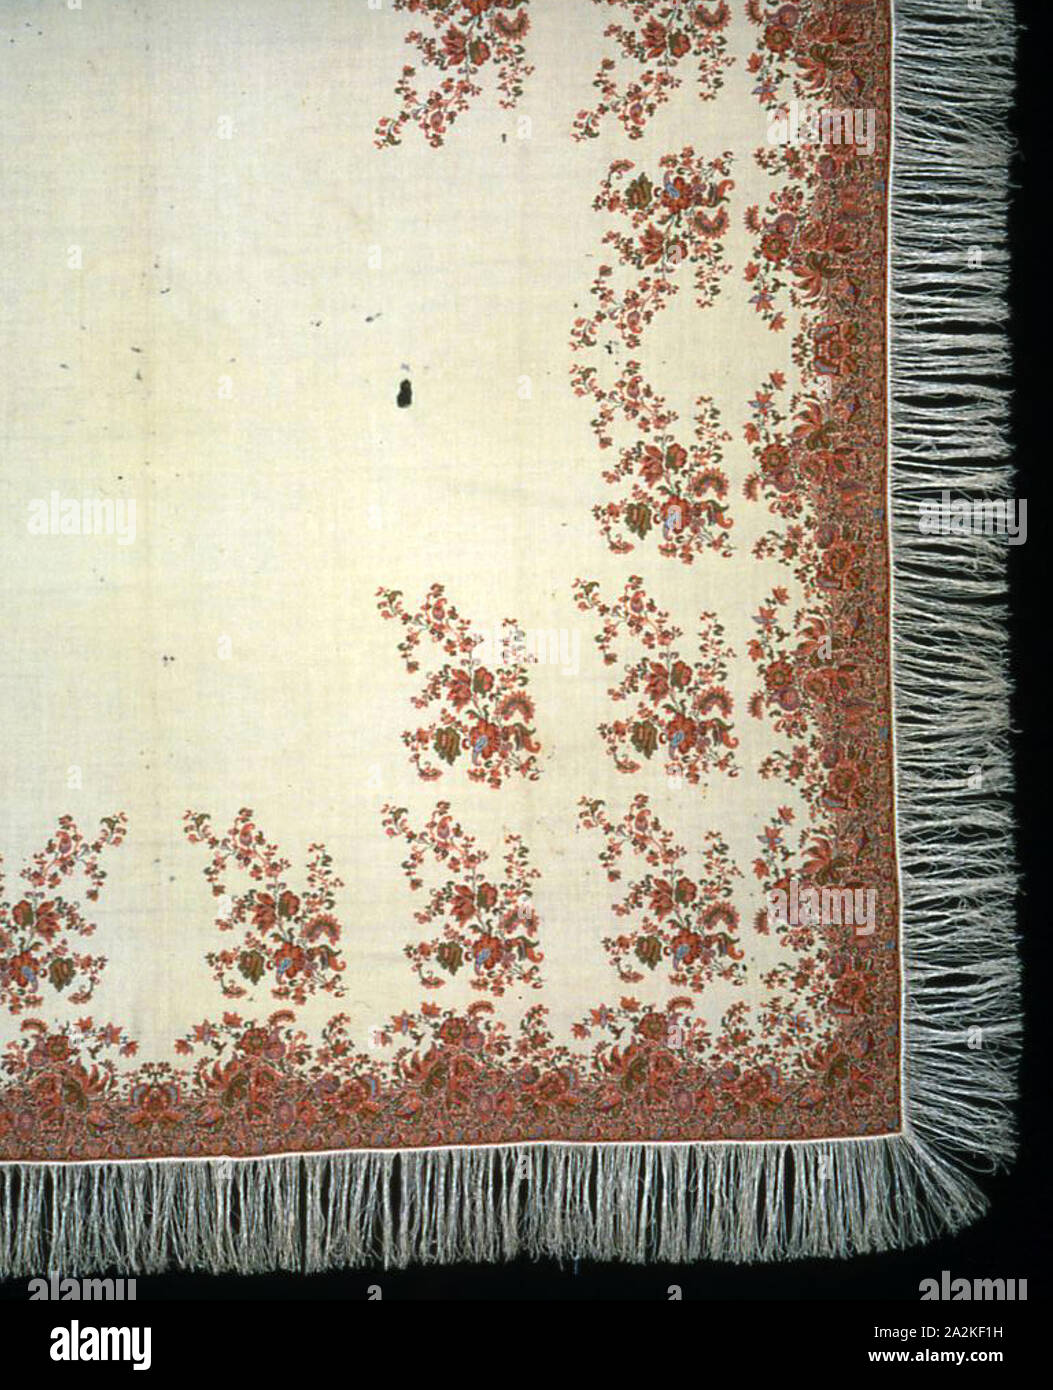 Square Shawl, 1840, England, Norwich, or Scotland, Edinburgh, England, Wool, silk, and cotton, center of weft-float faced 1:3 'Z' twill weave, patterned areas of warp-float faced 3:1 'Z' twill weave with supplementary patterning wefts bound in weft-float faced 1:3 'Z' twill interlacings, attached silk, warp-faced weft ribbed plain weave extended ground weft fringe, two selvages present, woven on loom with Jacquard attachment, 195.9 × 191.6 cm (77 1/8 × 75 3/8 in Stock Photo